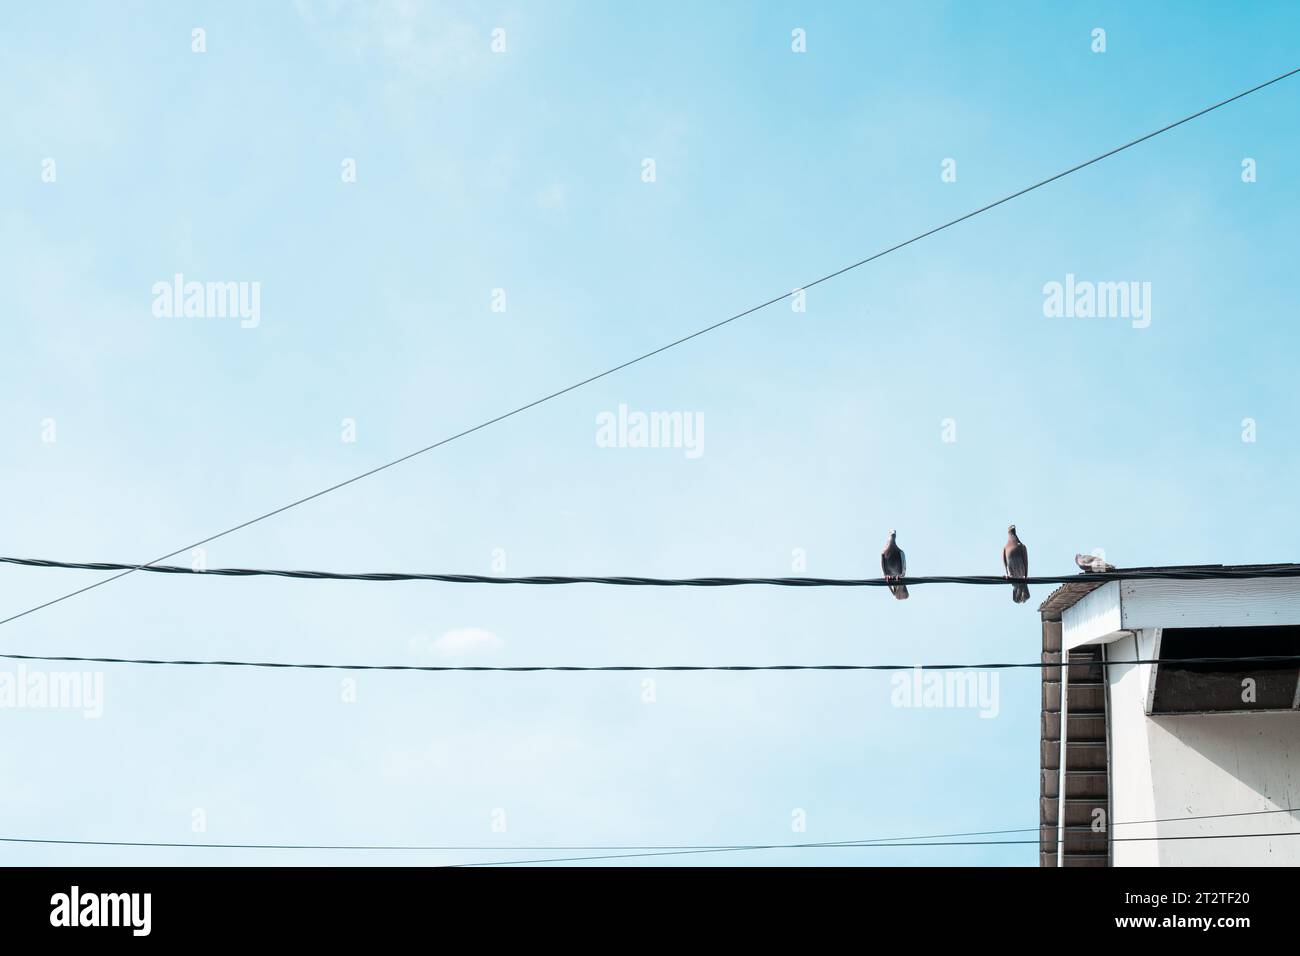 Simplicity in Nature: Small Bird Resting on Wire Against Blue Sky in Minimalist Photo Stock Photo